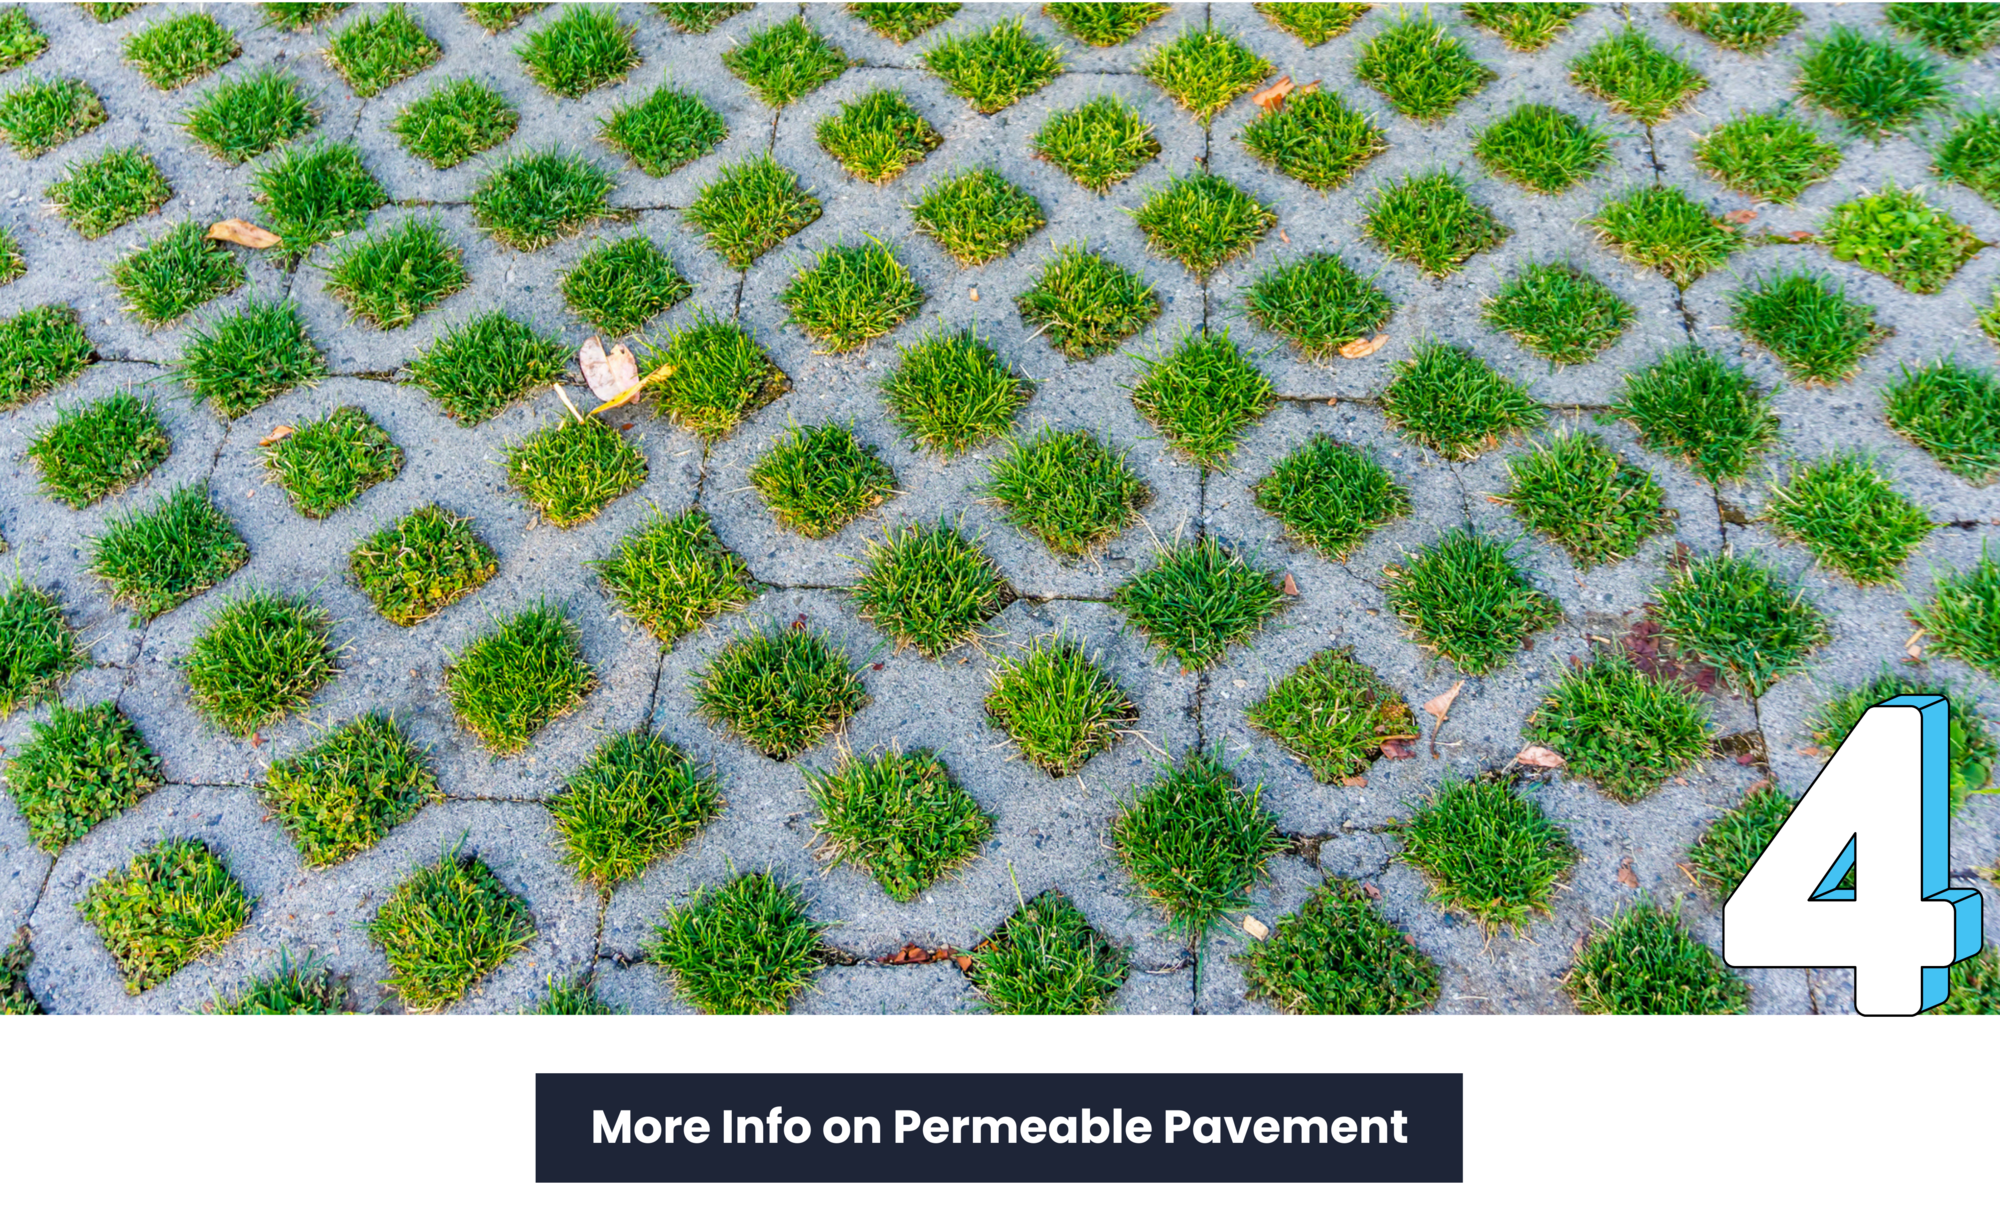 Permeable pavement with grass growing through it